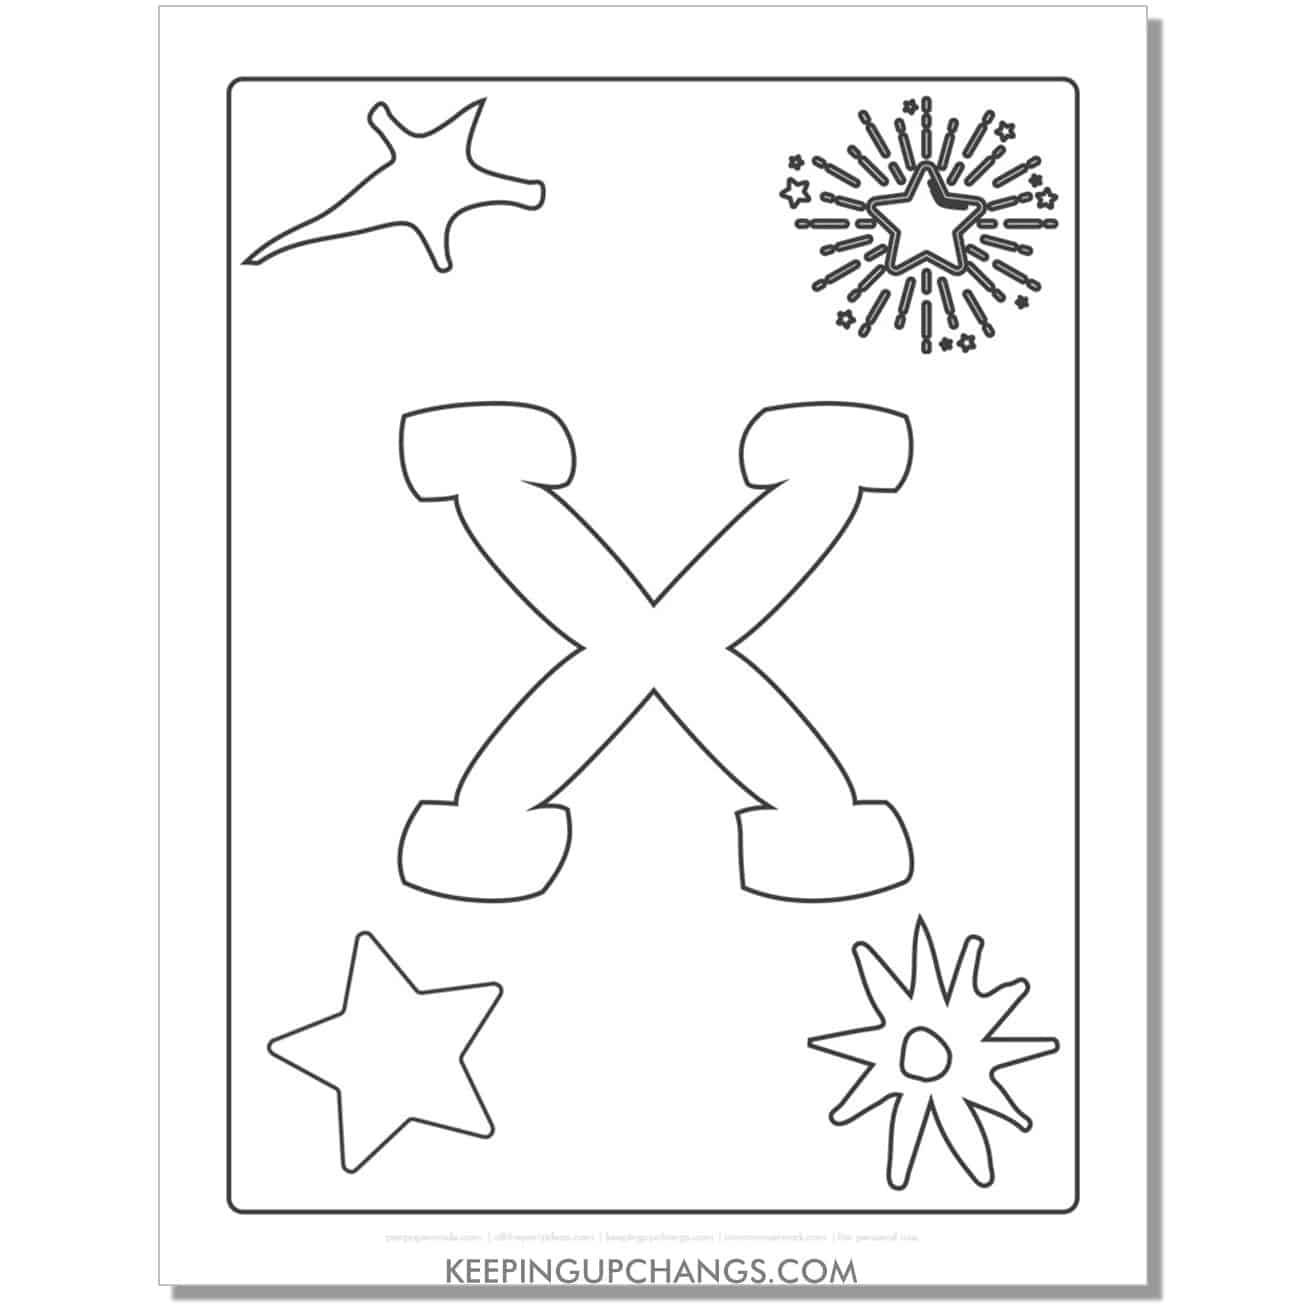 cool letter x to color with stars, space theme.